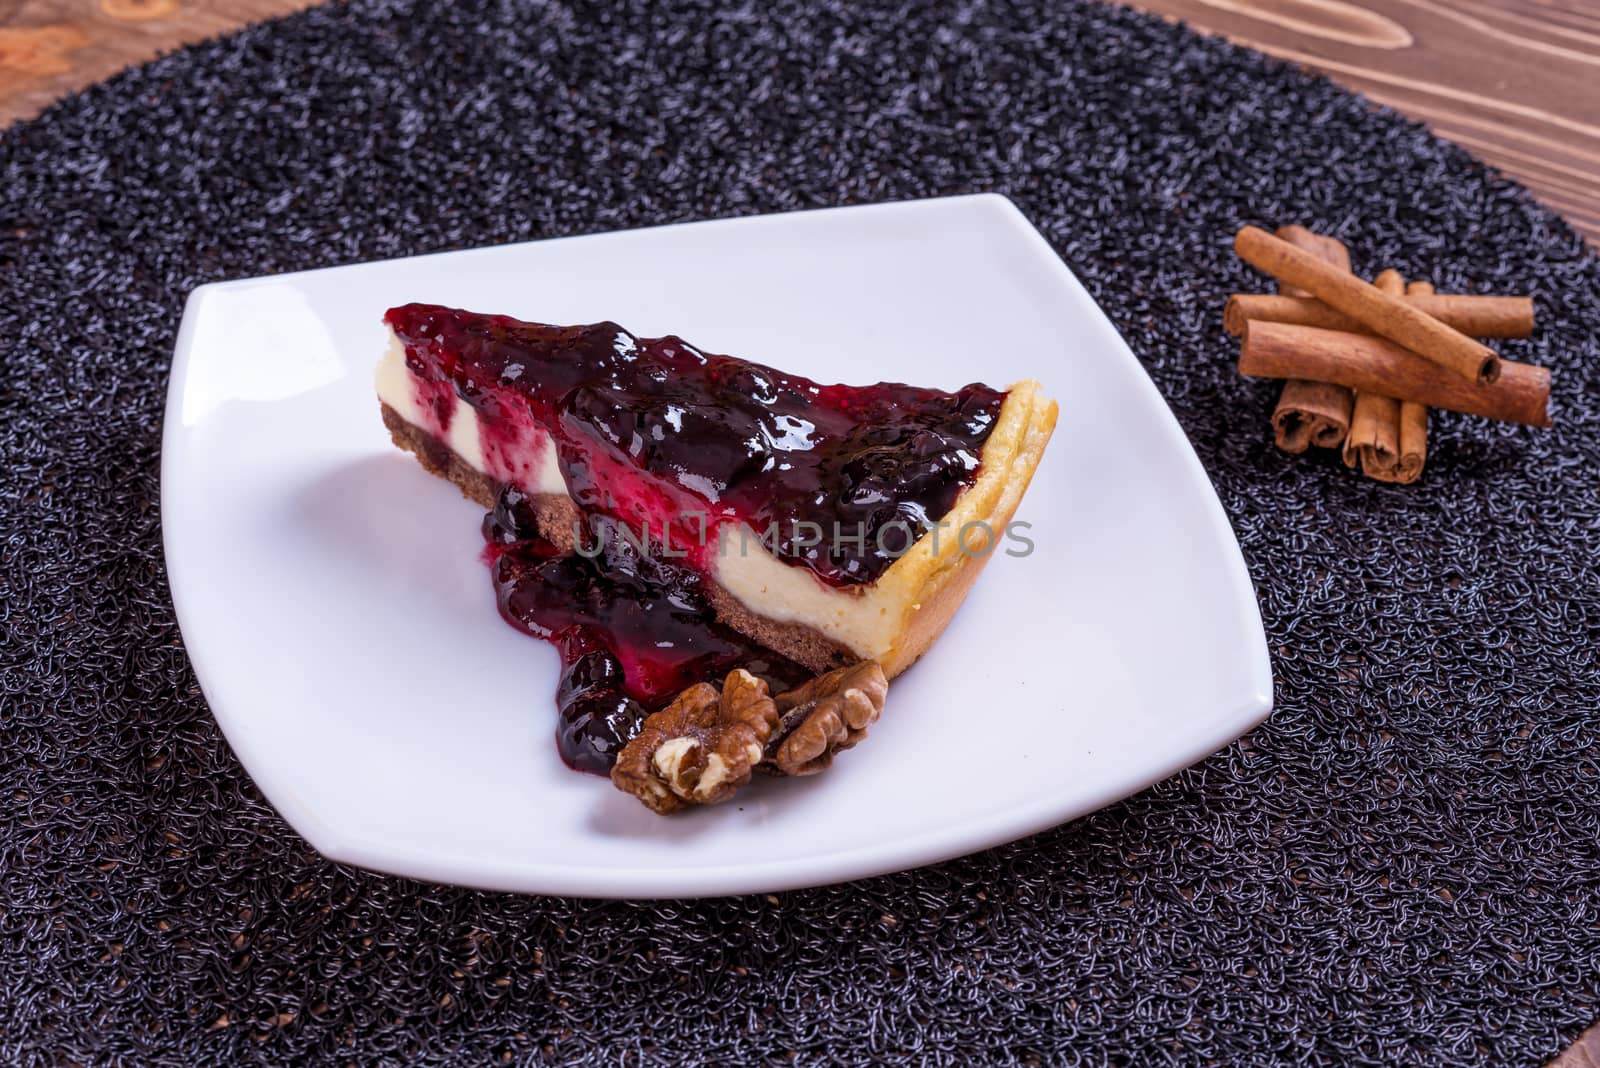 Piece of blueberry cheesecake on a plate with a silver fork.